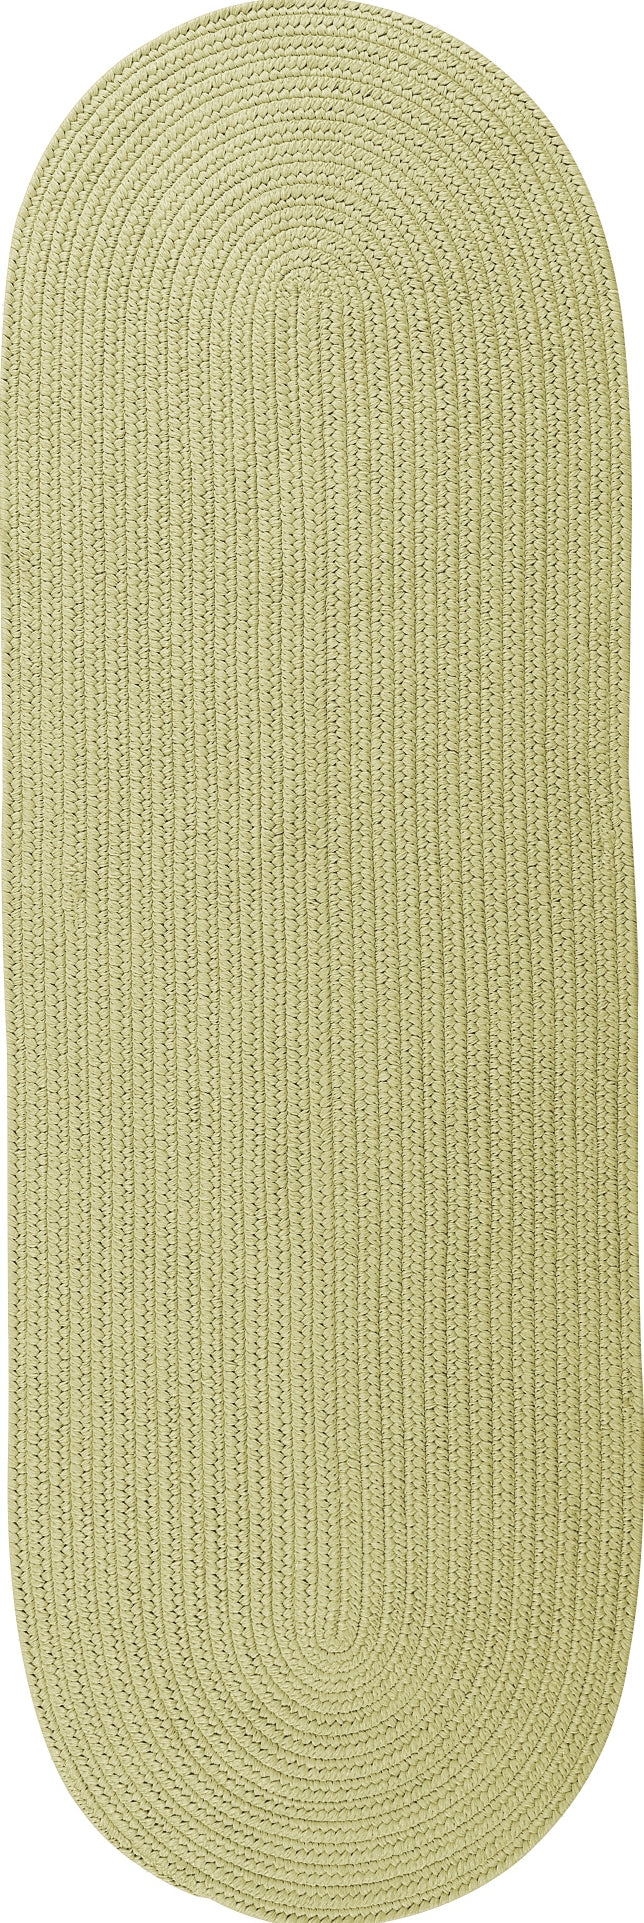 Colonial Mills Reversible Flat-Braid (Oval) Runner RV66 Sprout Green Area Rug